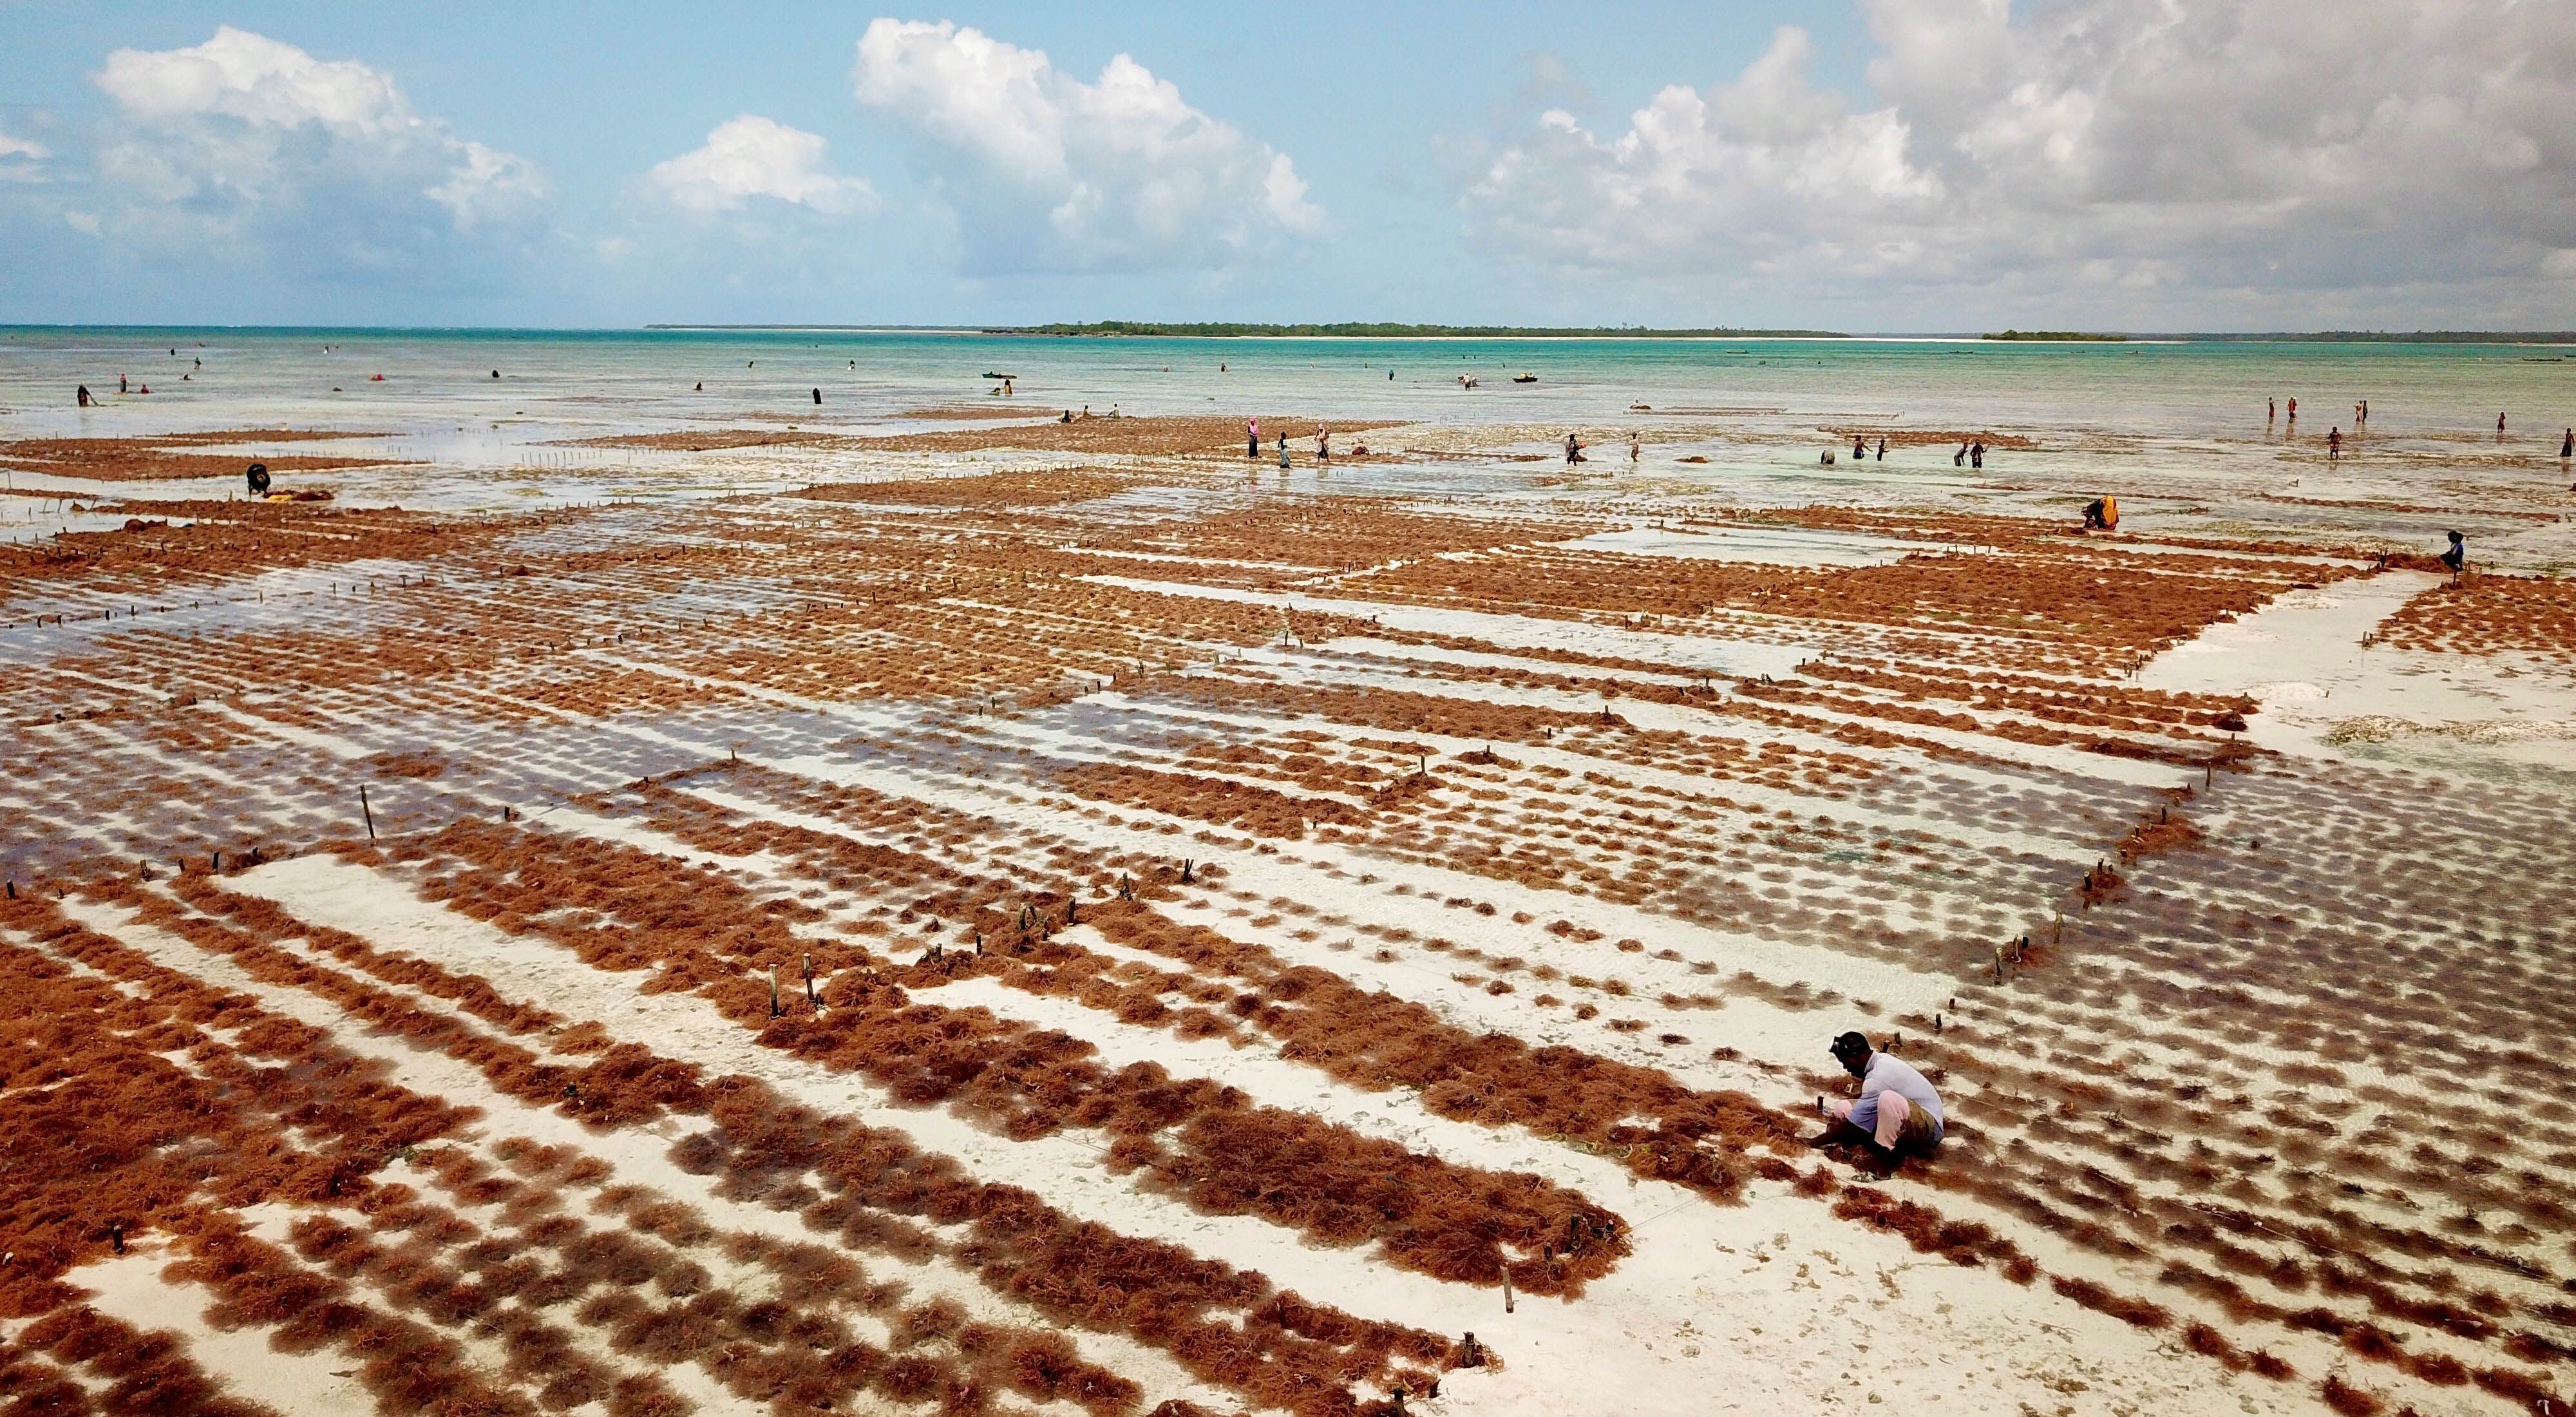 a wide view of rows of red seaweed growing in shallow water, with people tending to the rows